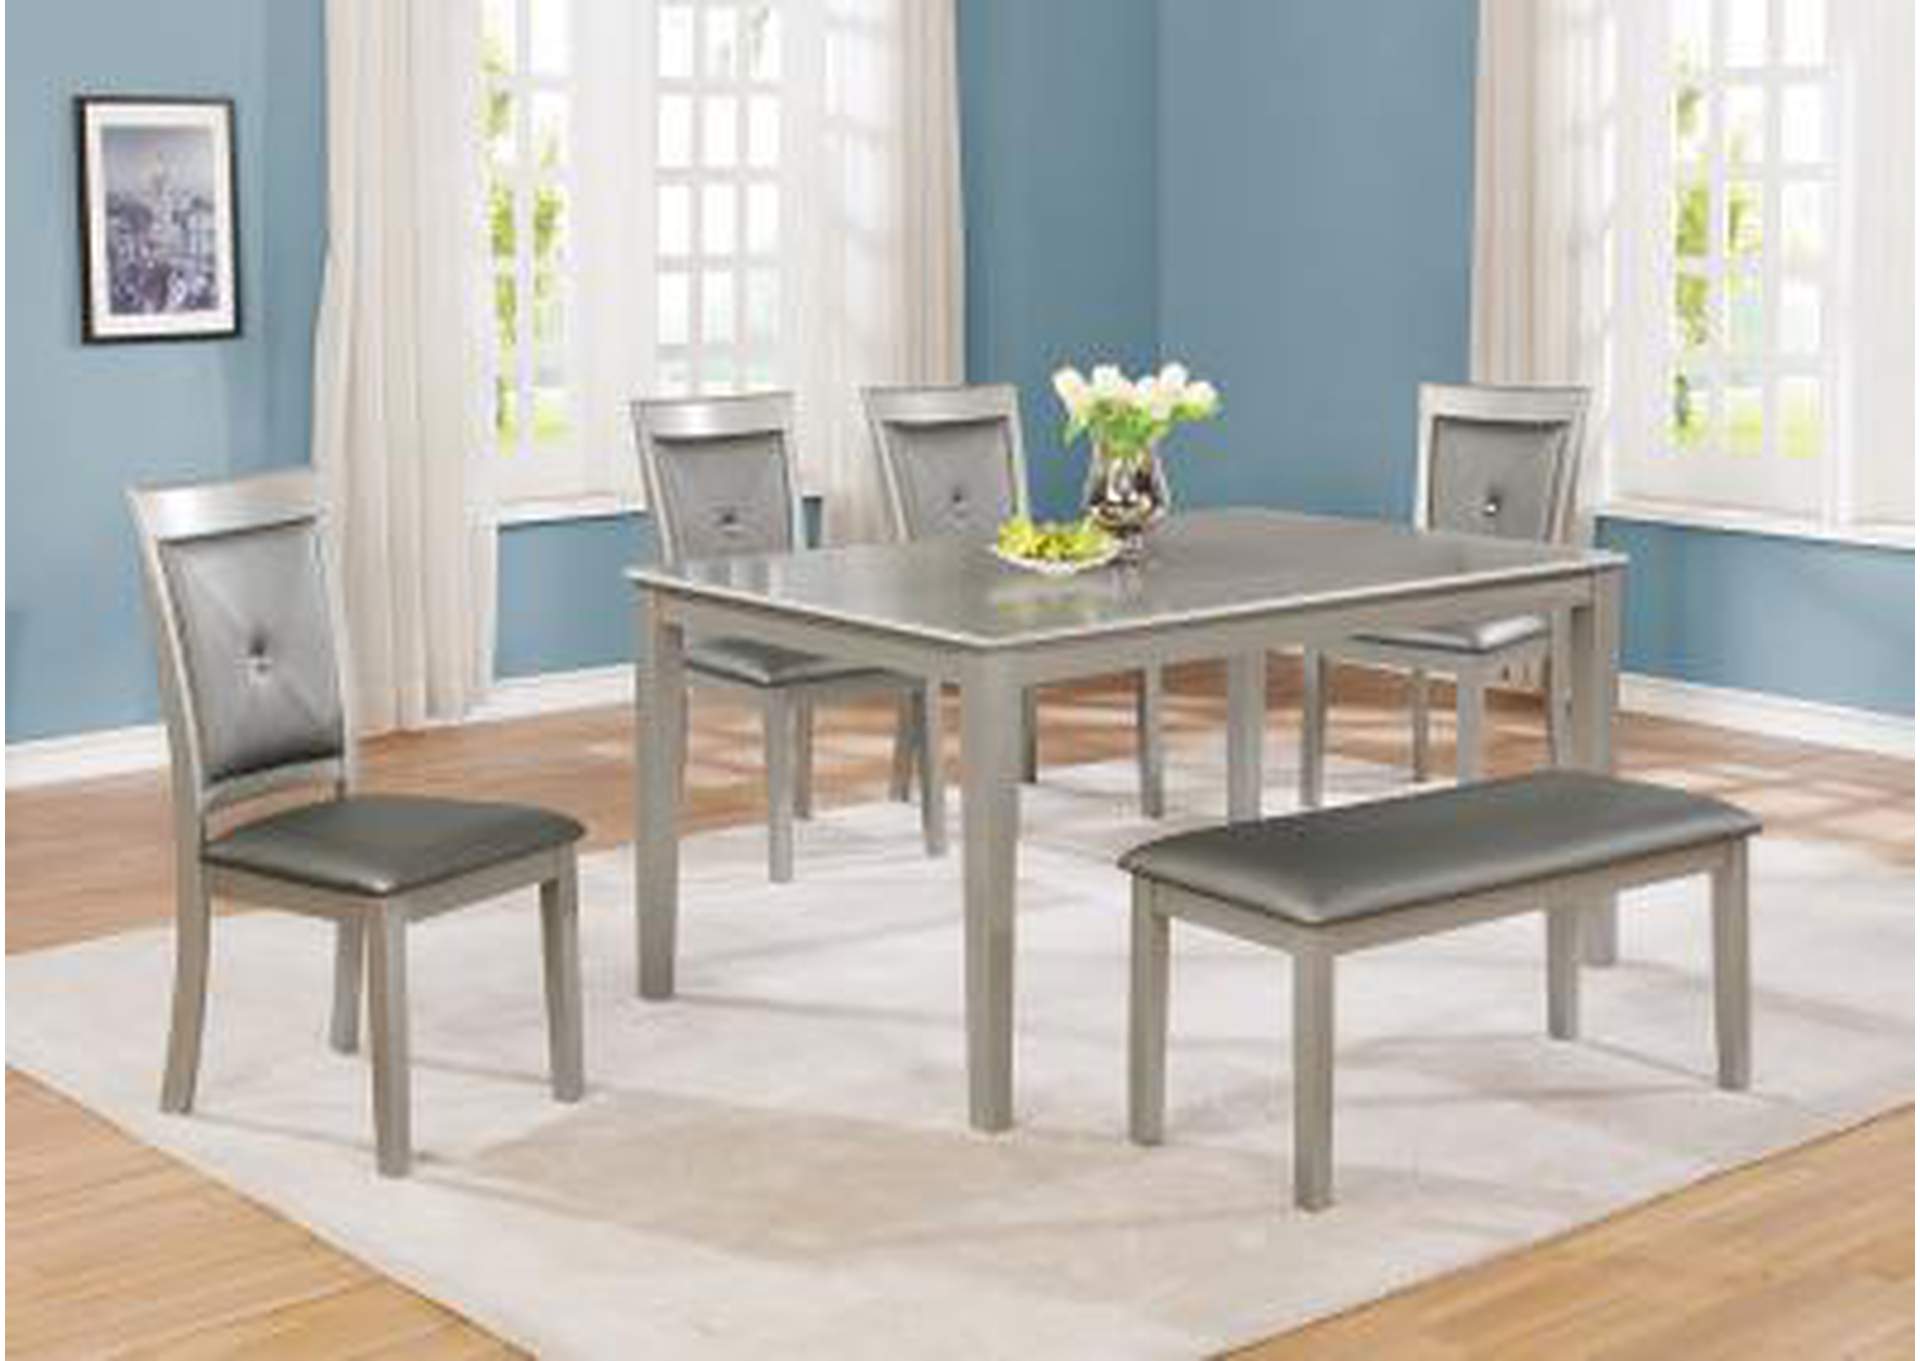 D650 Table and 4 Chairs and Bench,Nationwide